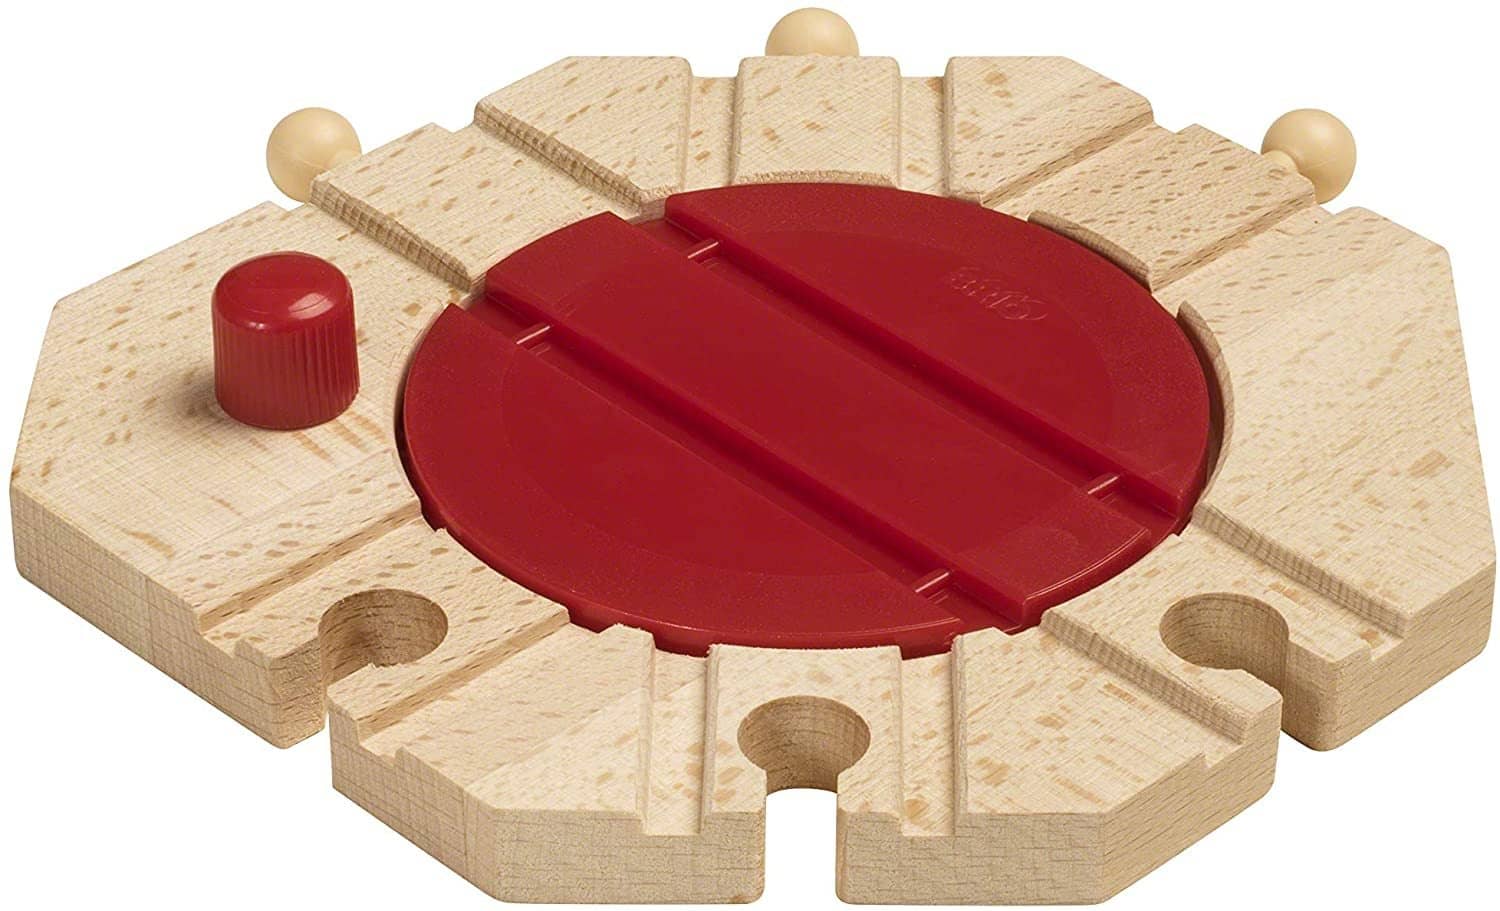 Brio World - 33361 Mechanical Turntable | Train Toy Accessory For Kids Ages 3 And Up-Kidding Around NYC